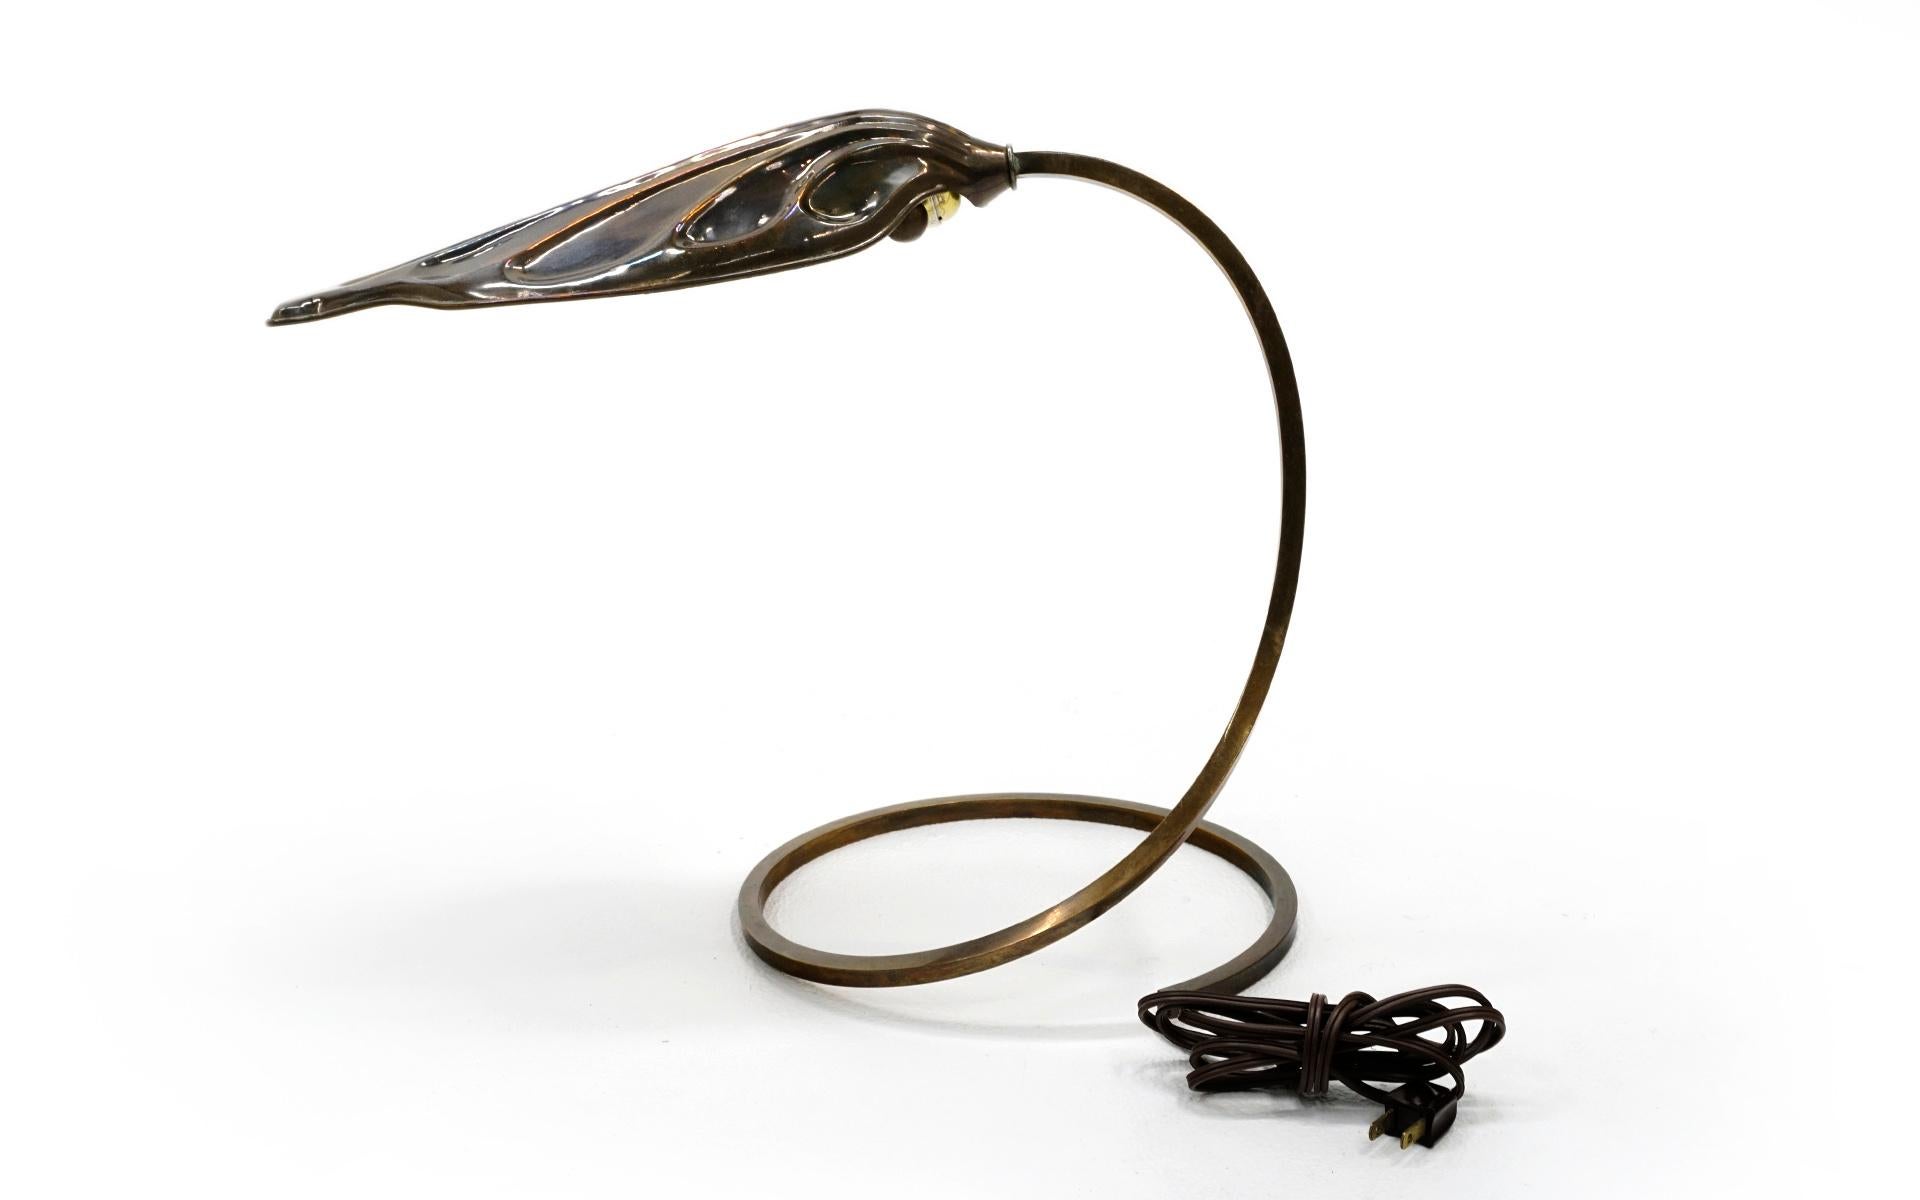 Brass table lamp designed by Tommaso Barbi, circa 1970. Rhubard leaf design with spiraling stem to a circular base. Beautifully patinated brass. This could be polished to a shine if one so desires.